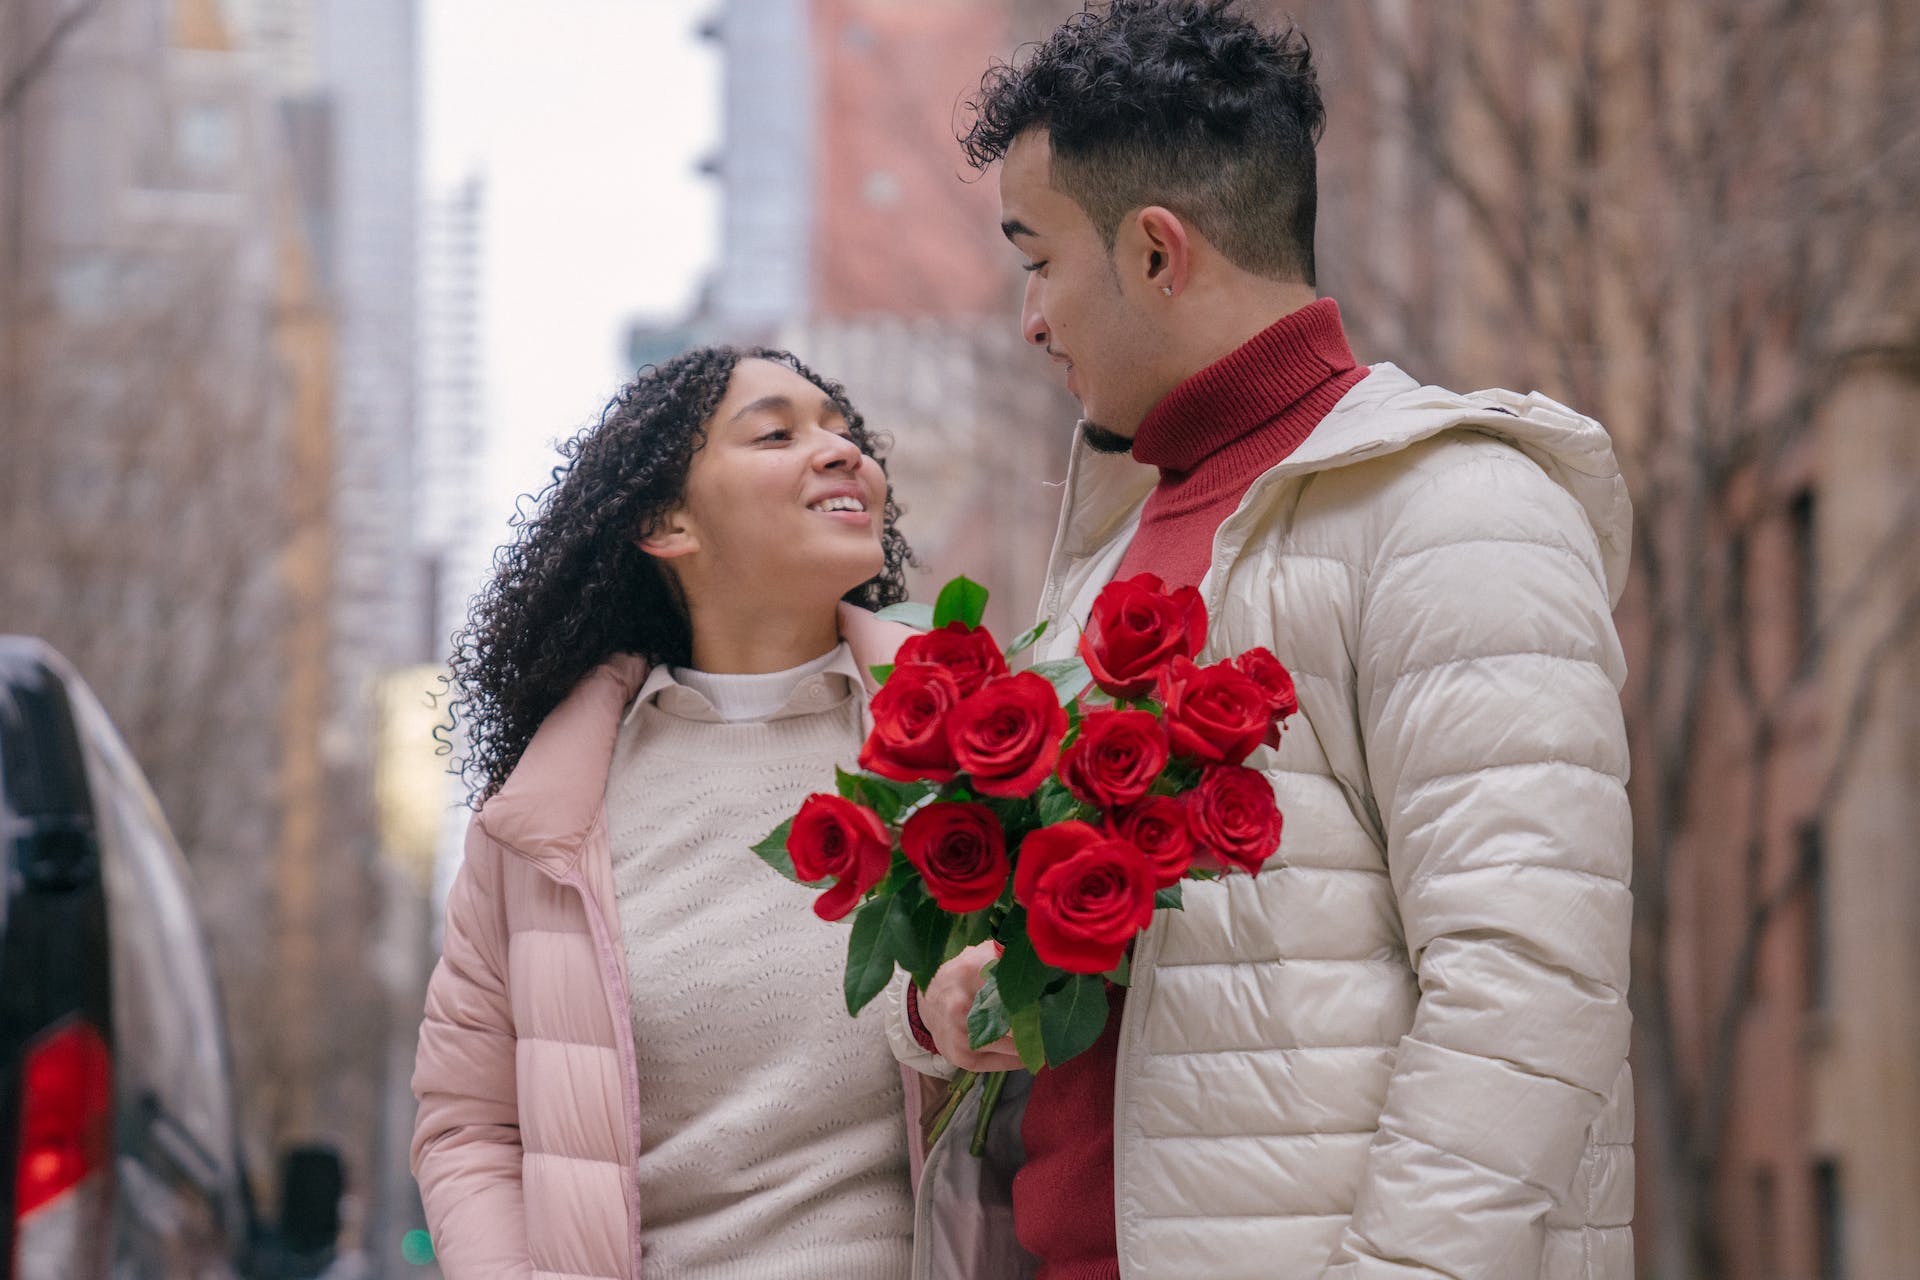 Man holding red roses for his lover | Source: Pexels